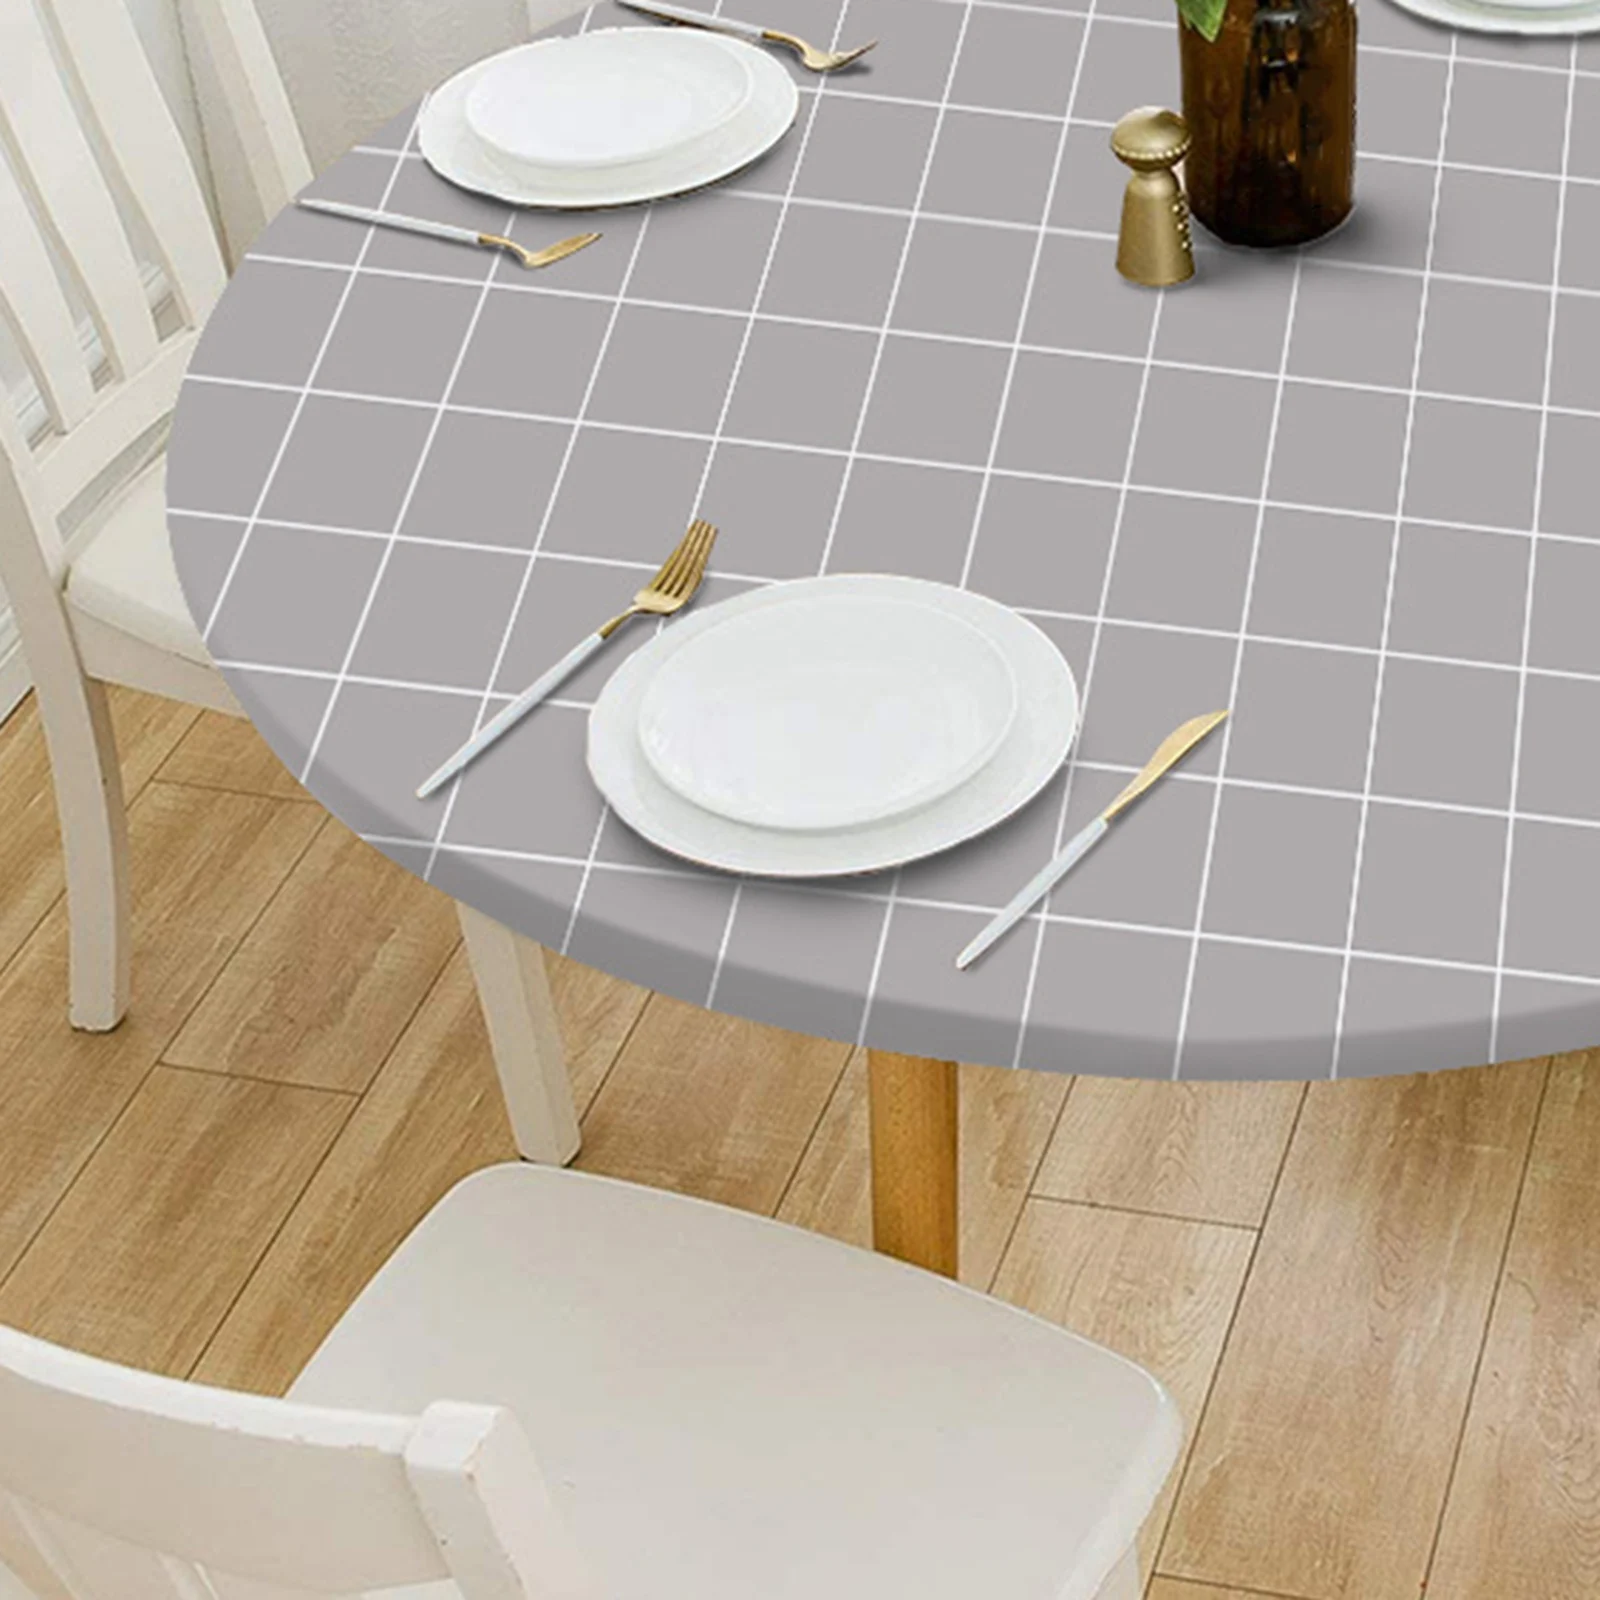 Fitted Table Cloth Water Resistance Dinner Table Cover Dust Proof Wipe Clean Plaid Table Cover Elastic Edged Large Round Table